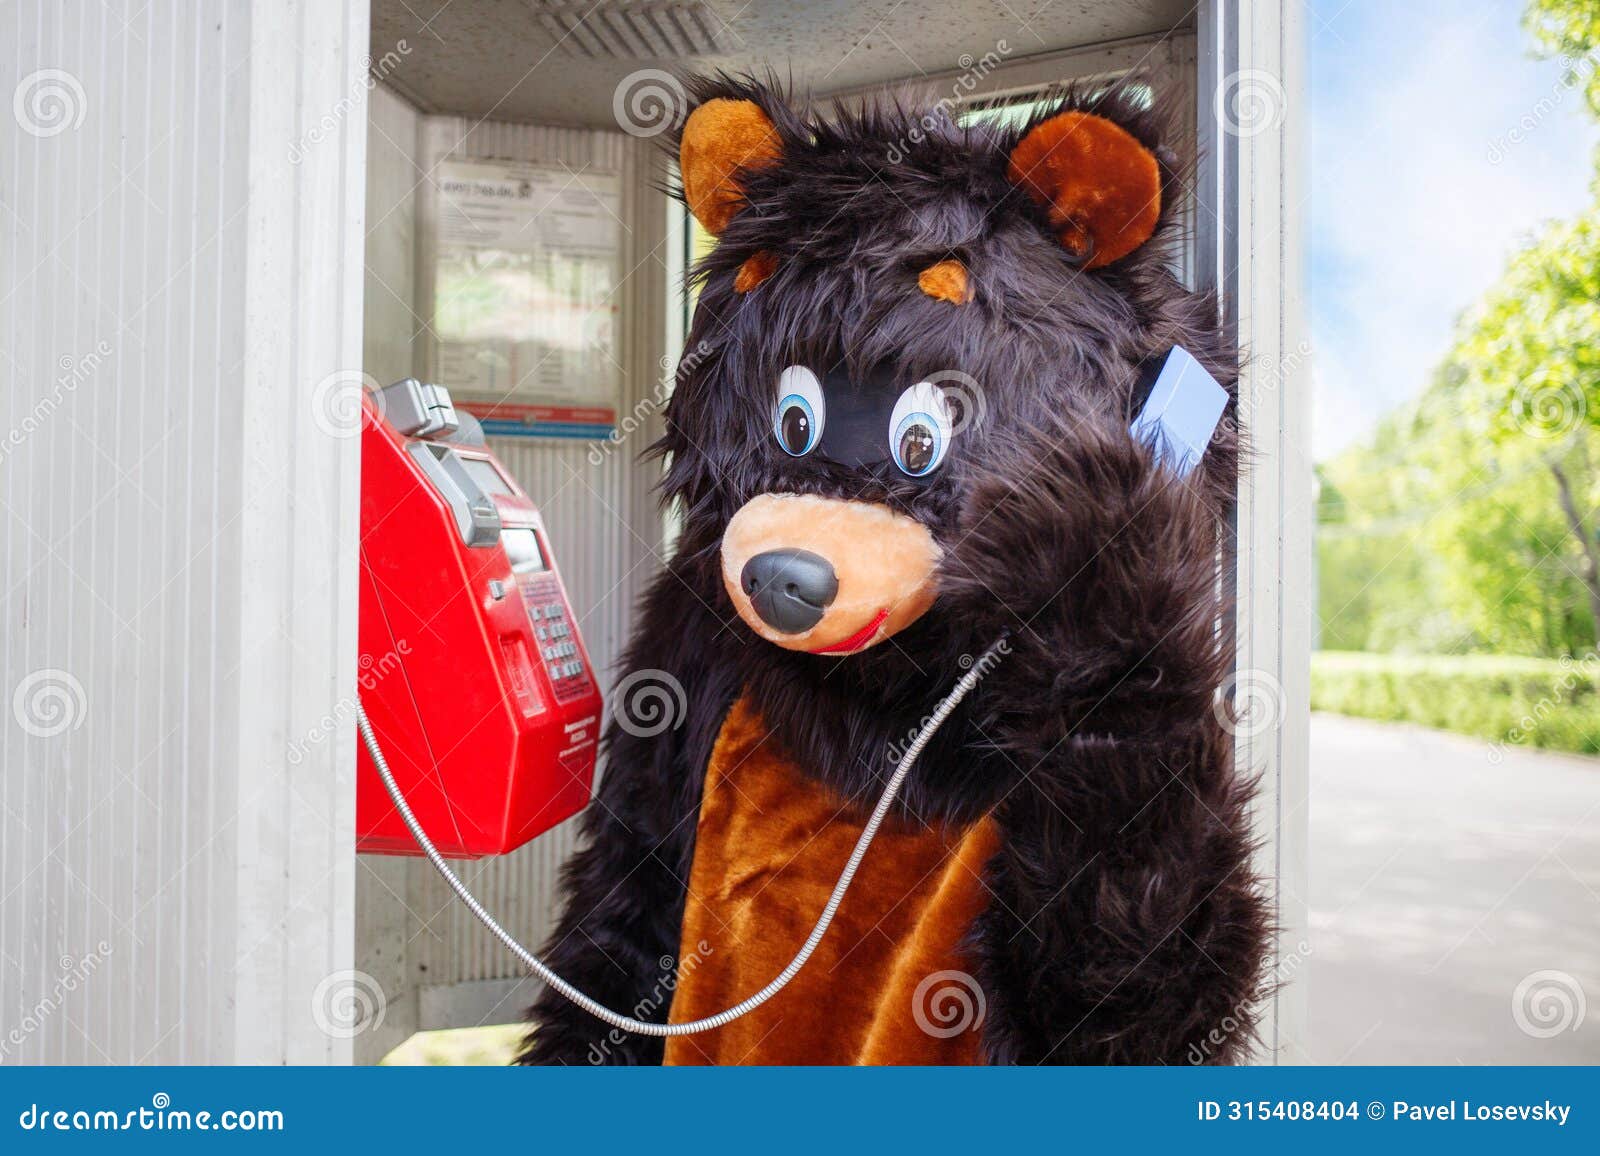 actor dressed as bear talks on red public